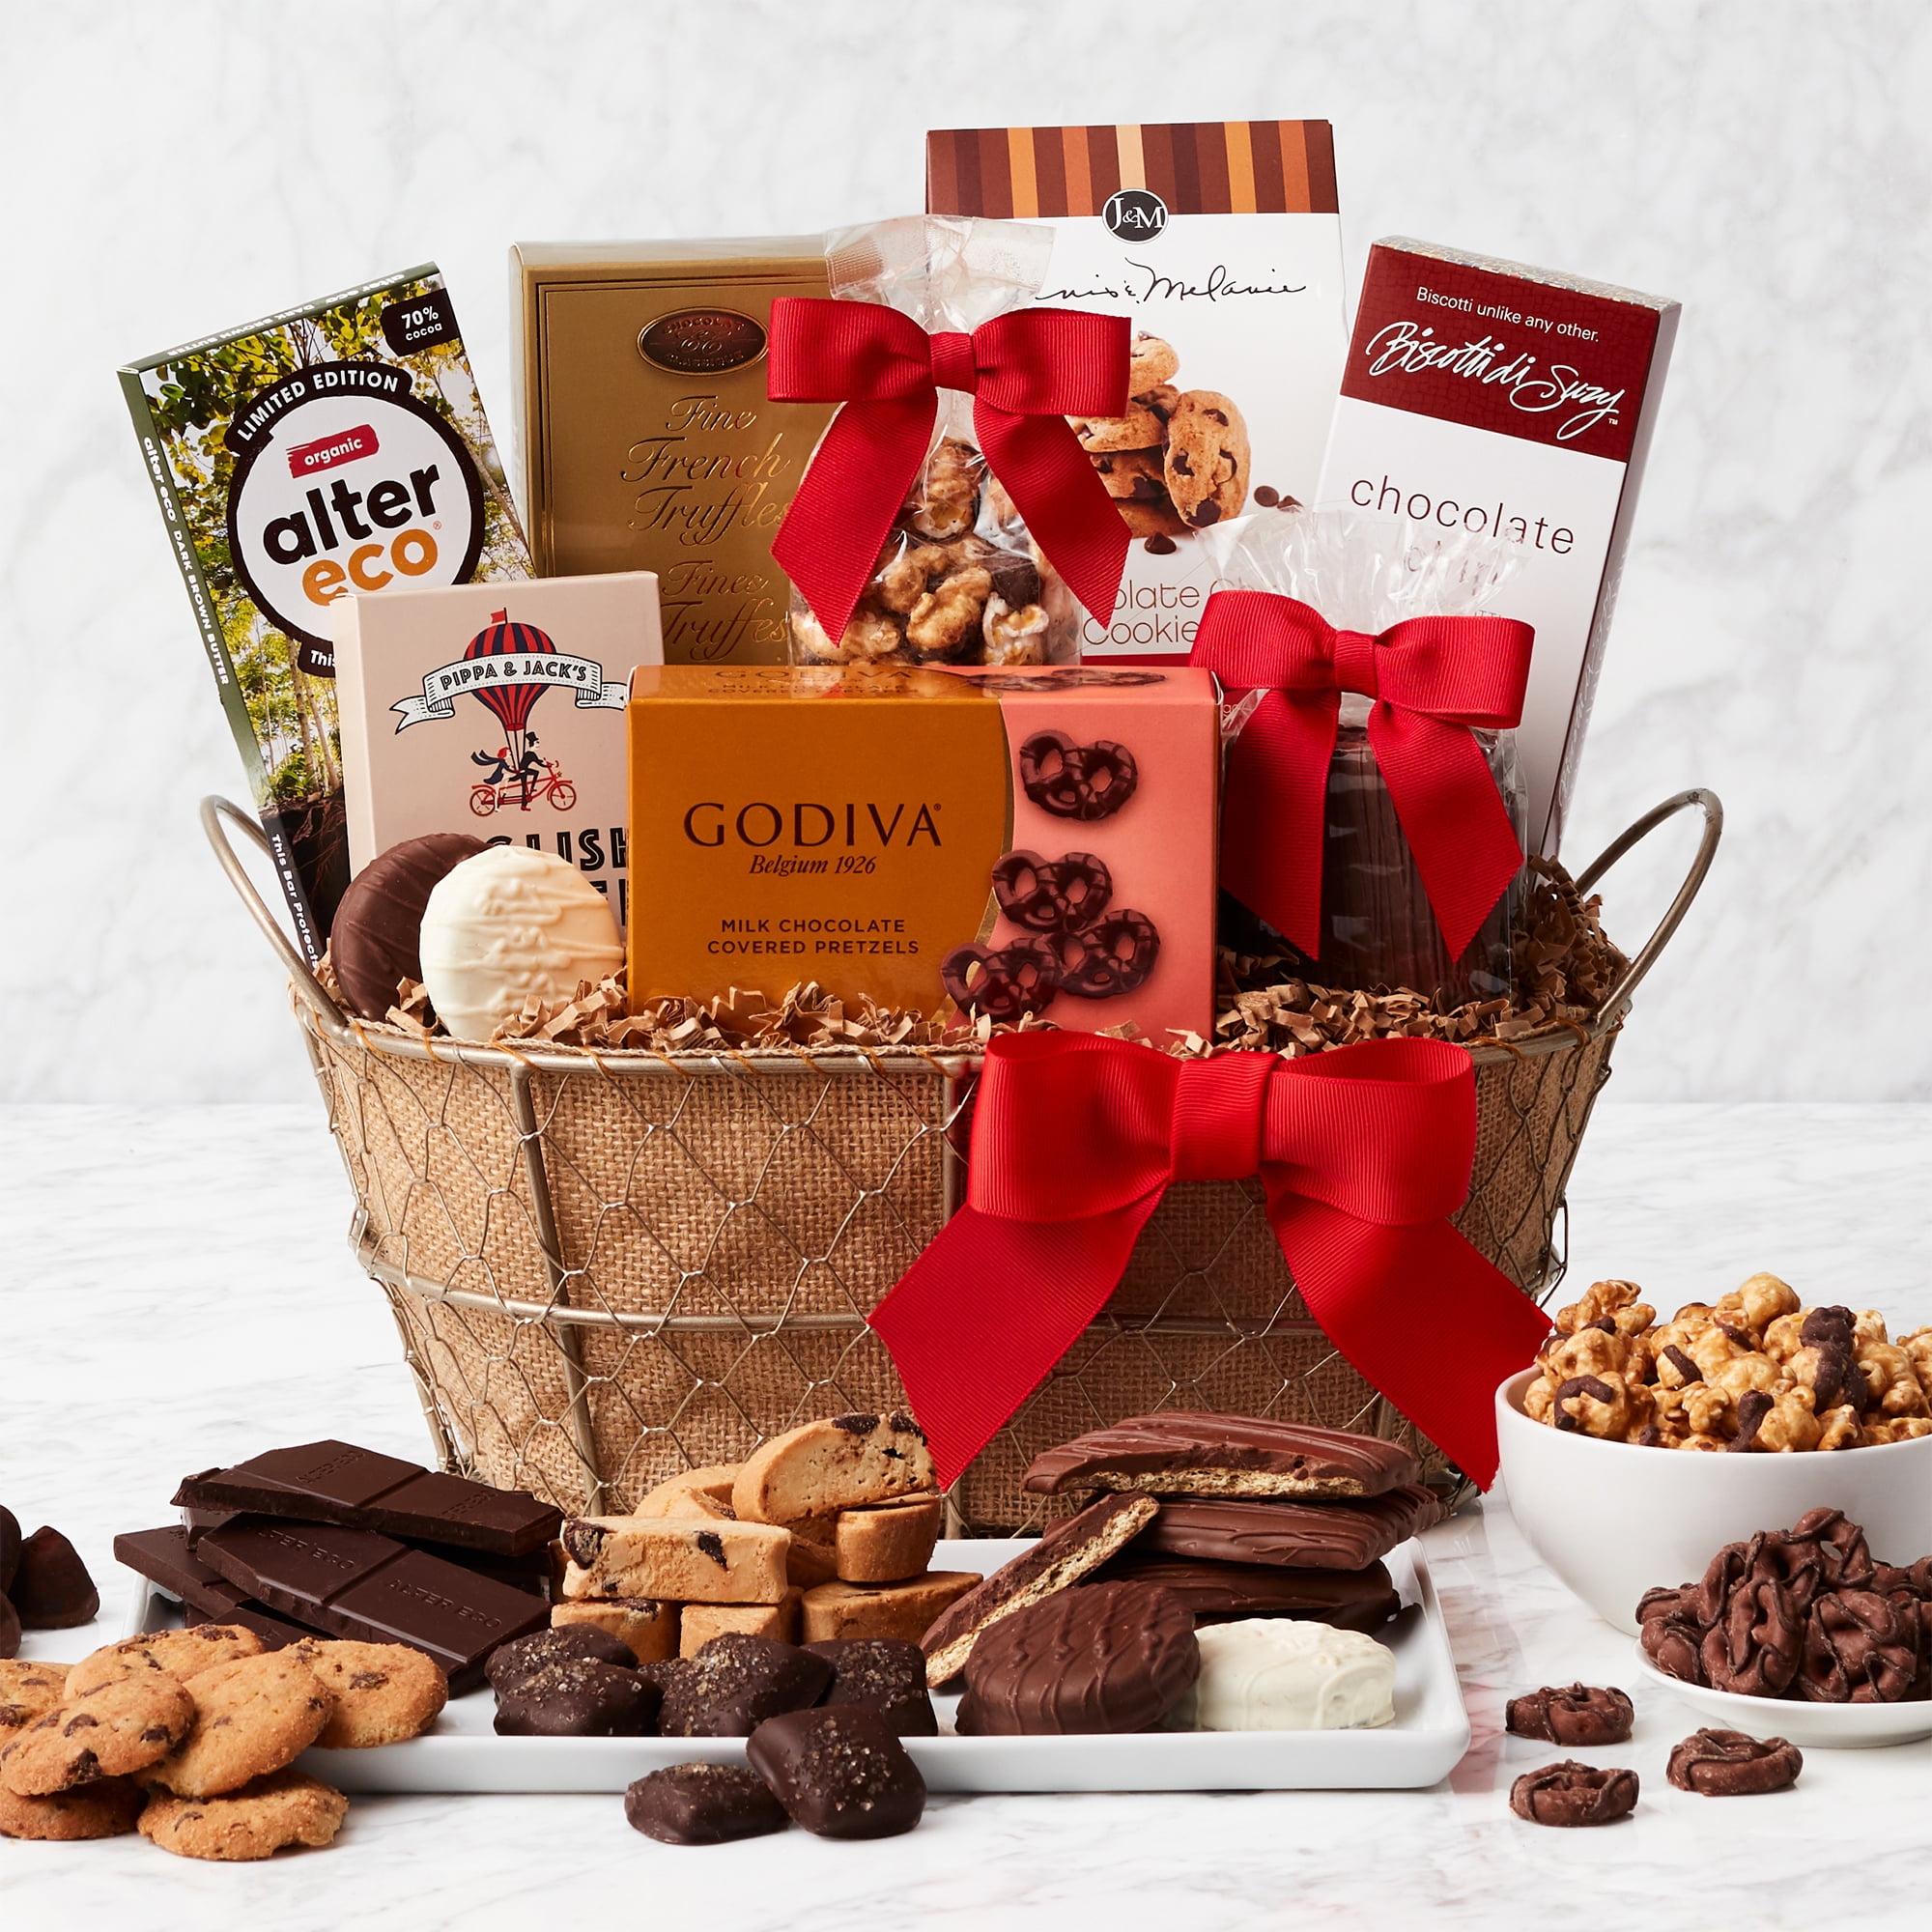 The Swiss Colony 27 Favorites Food Gift Box - Assorted Cheeses, Chocolates,  Candies, Petits Fours, and Summer Sausage Meats - Holiday Red Box